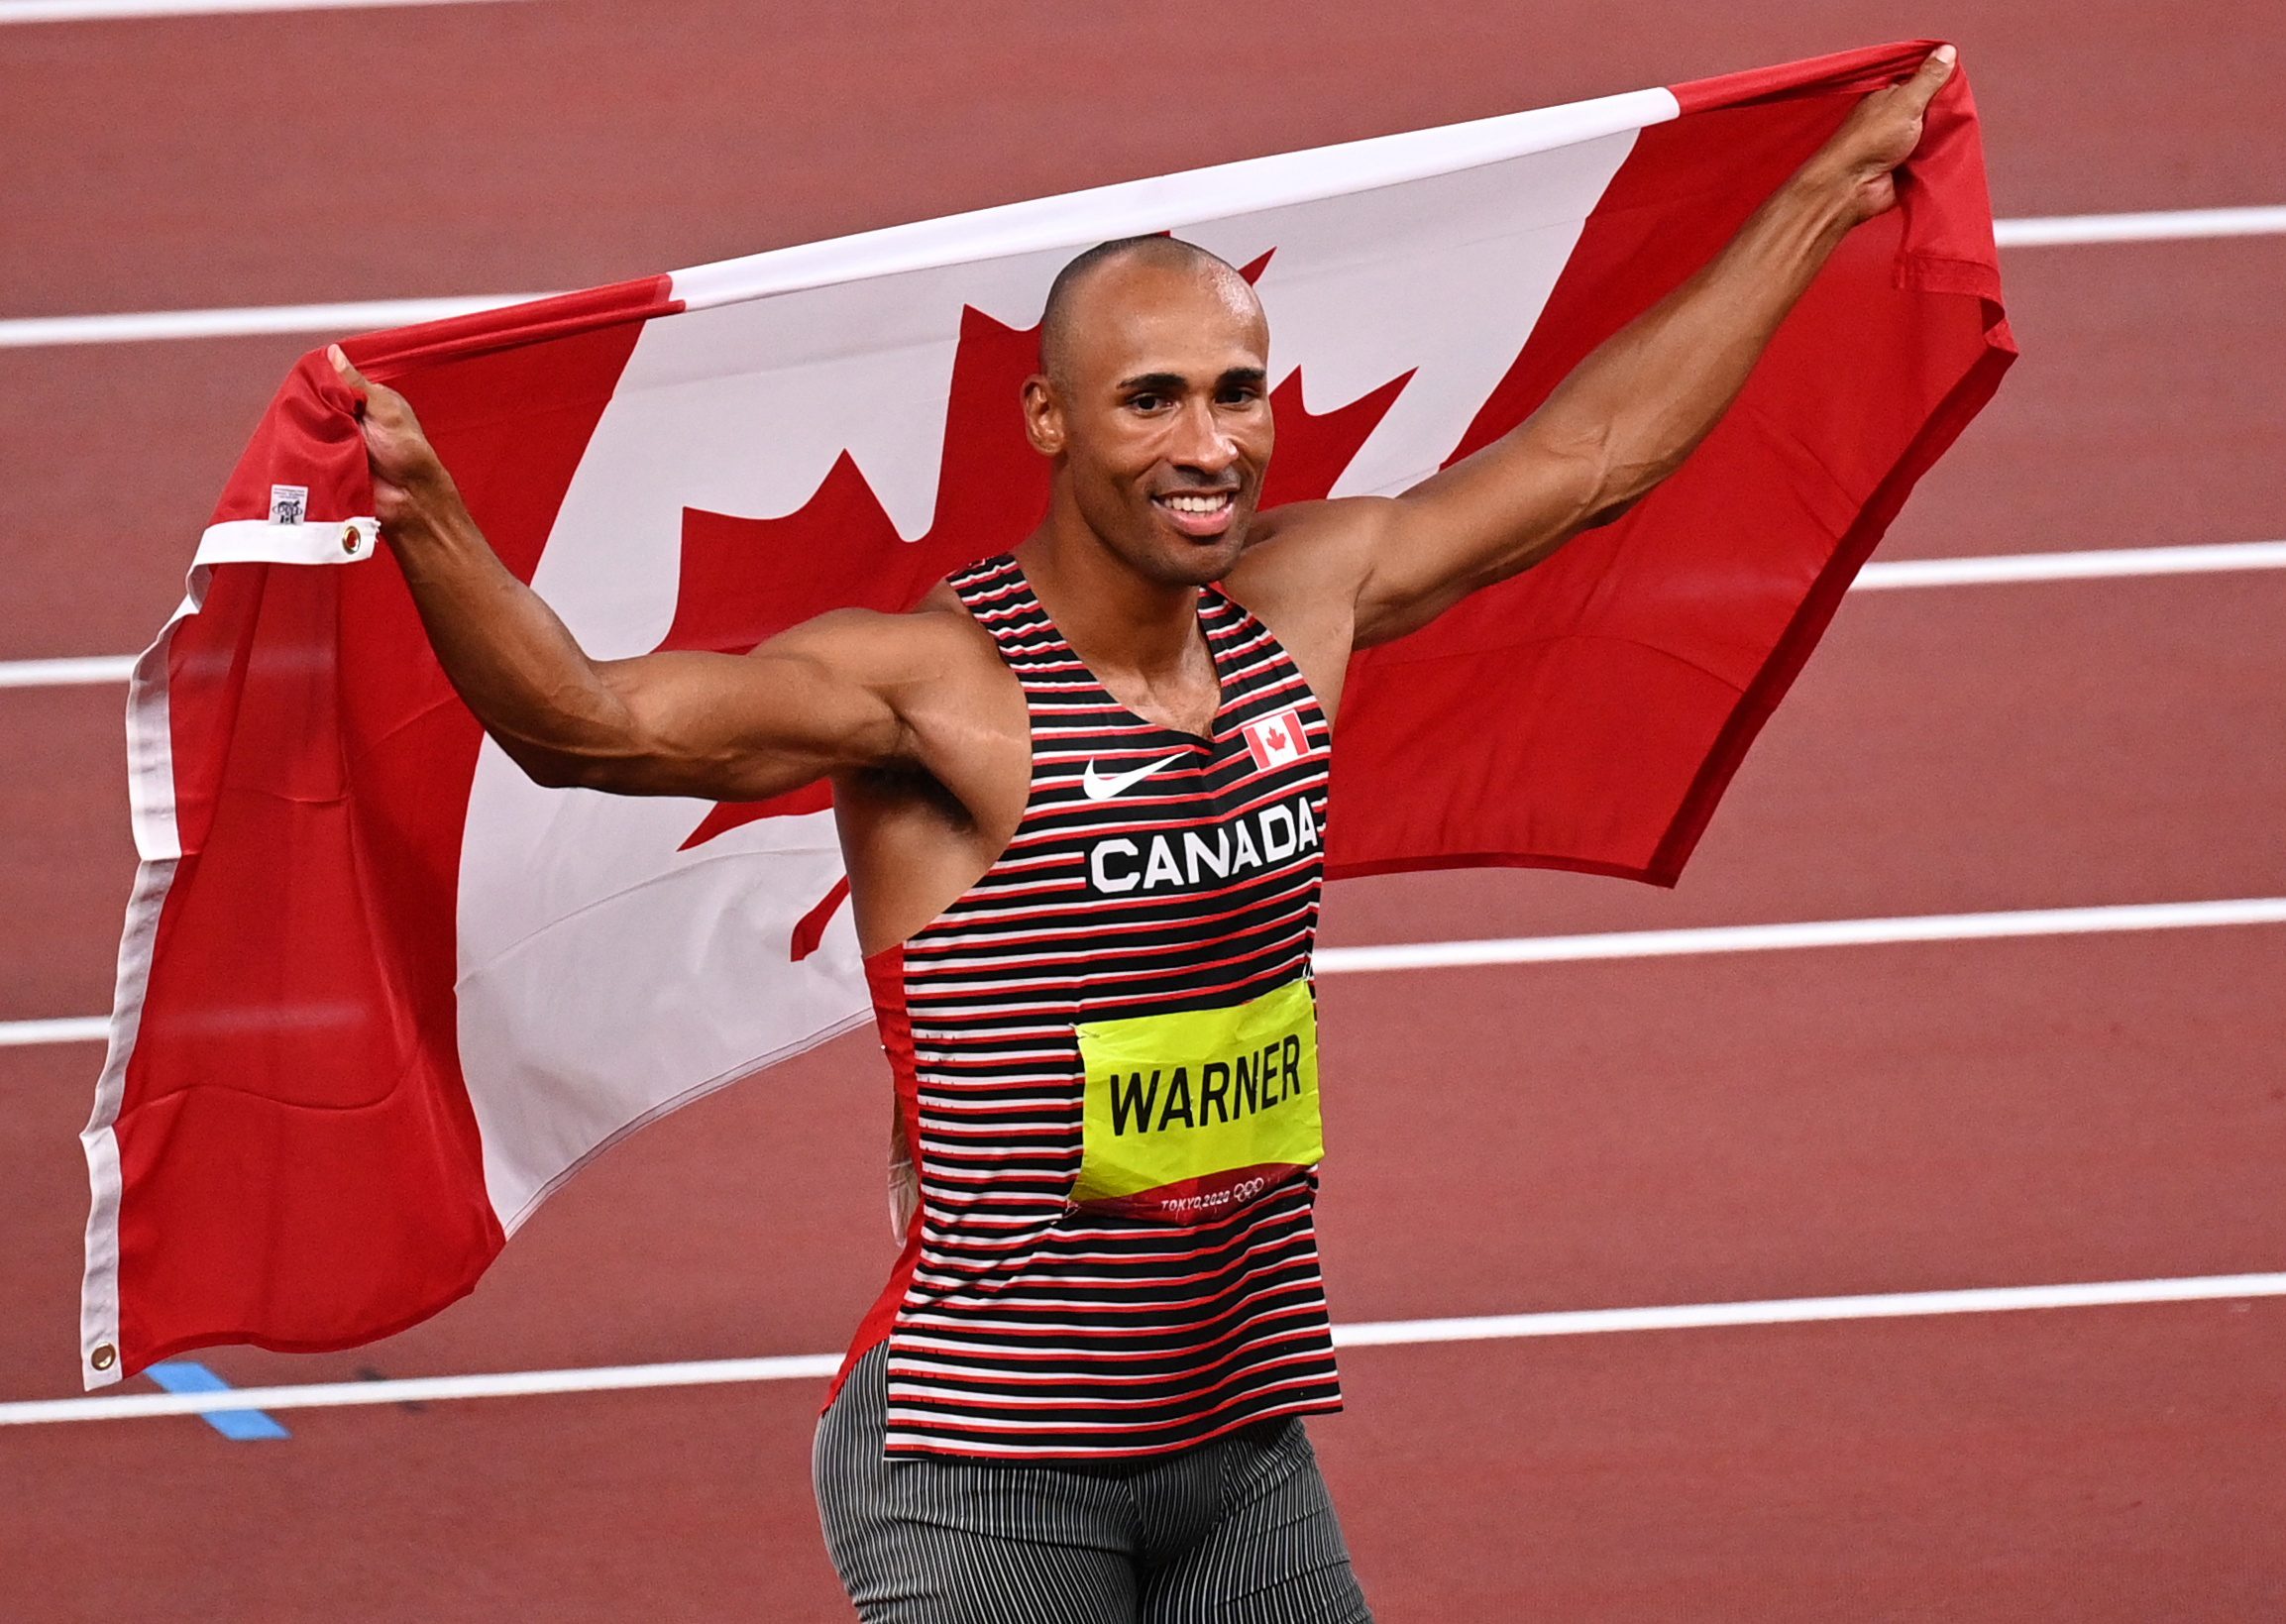 Canada's Warner breaks Olympic record on way to decathlon gold